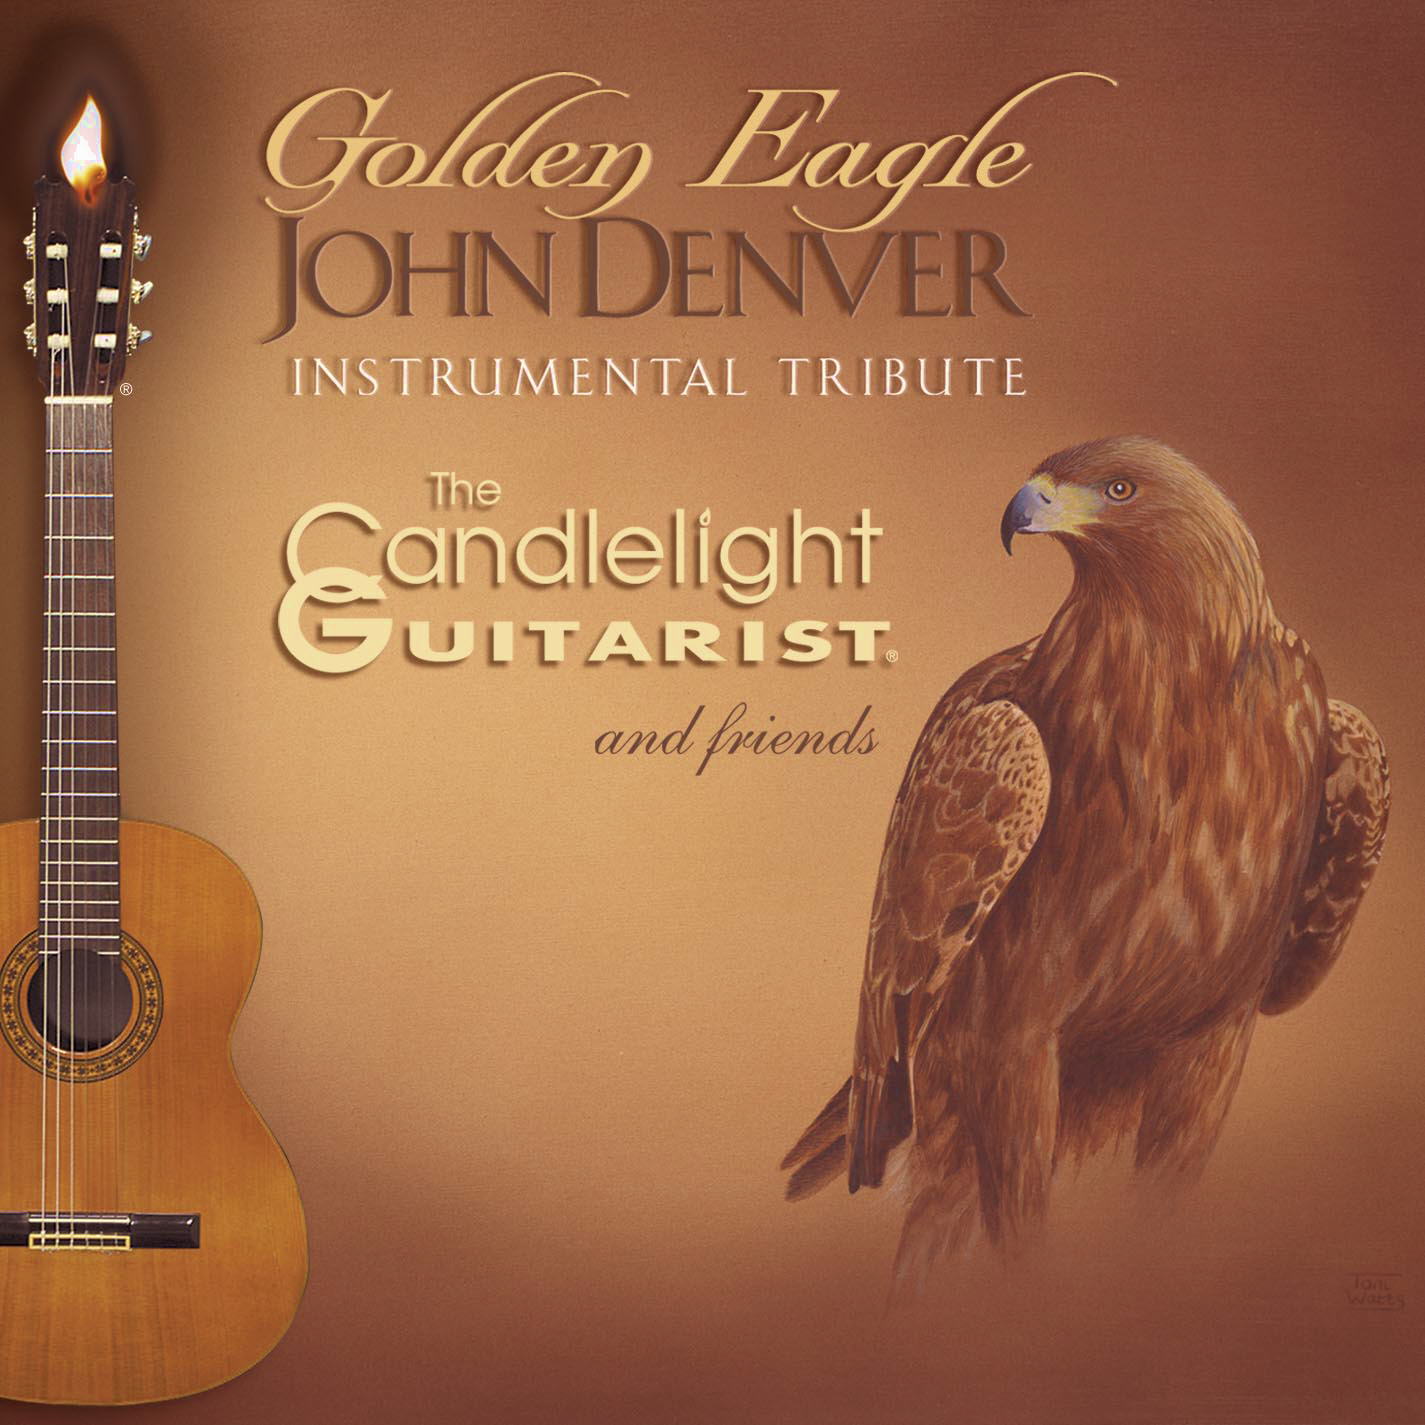 Golden Eagle: JOHN DENVER Instrumental Tribute by The Candlelight Guitarist ® and friends -CLICK TO ORDER CD